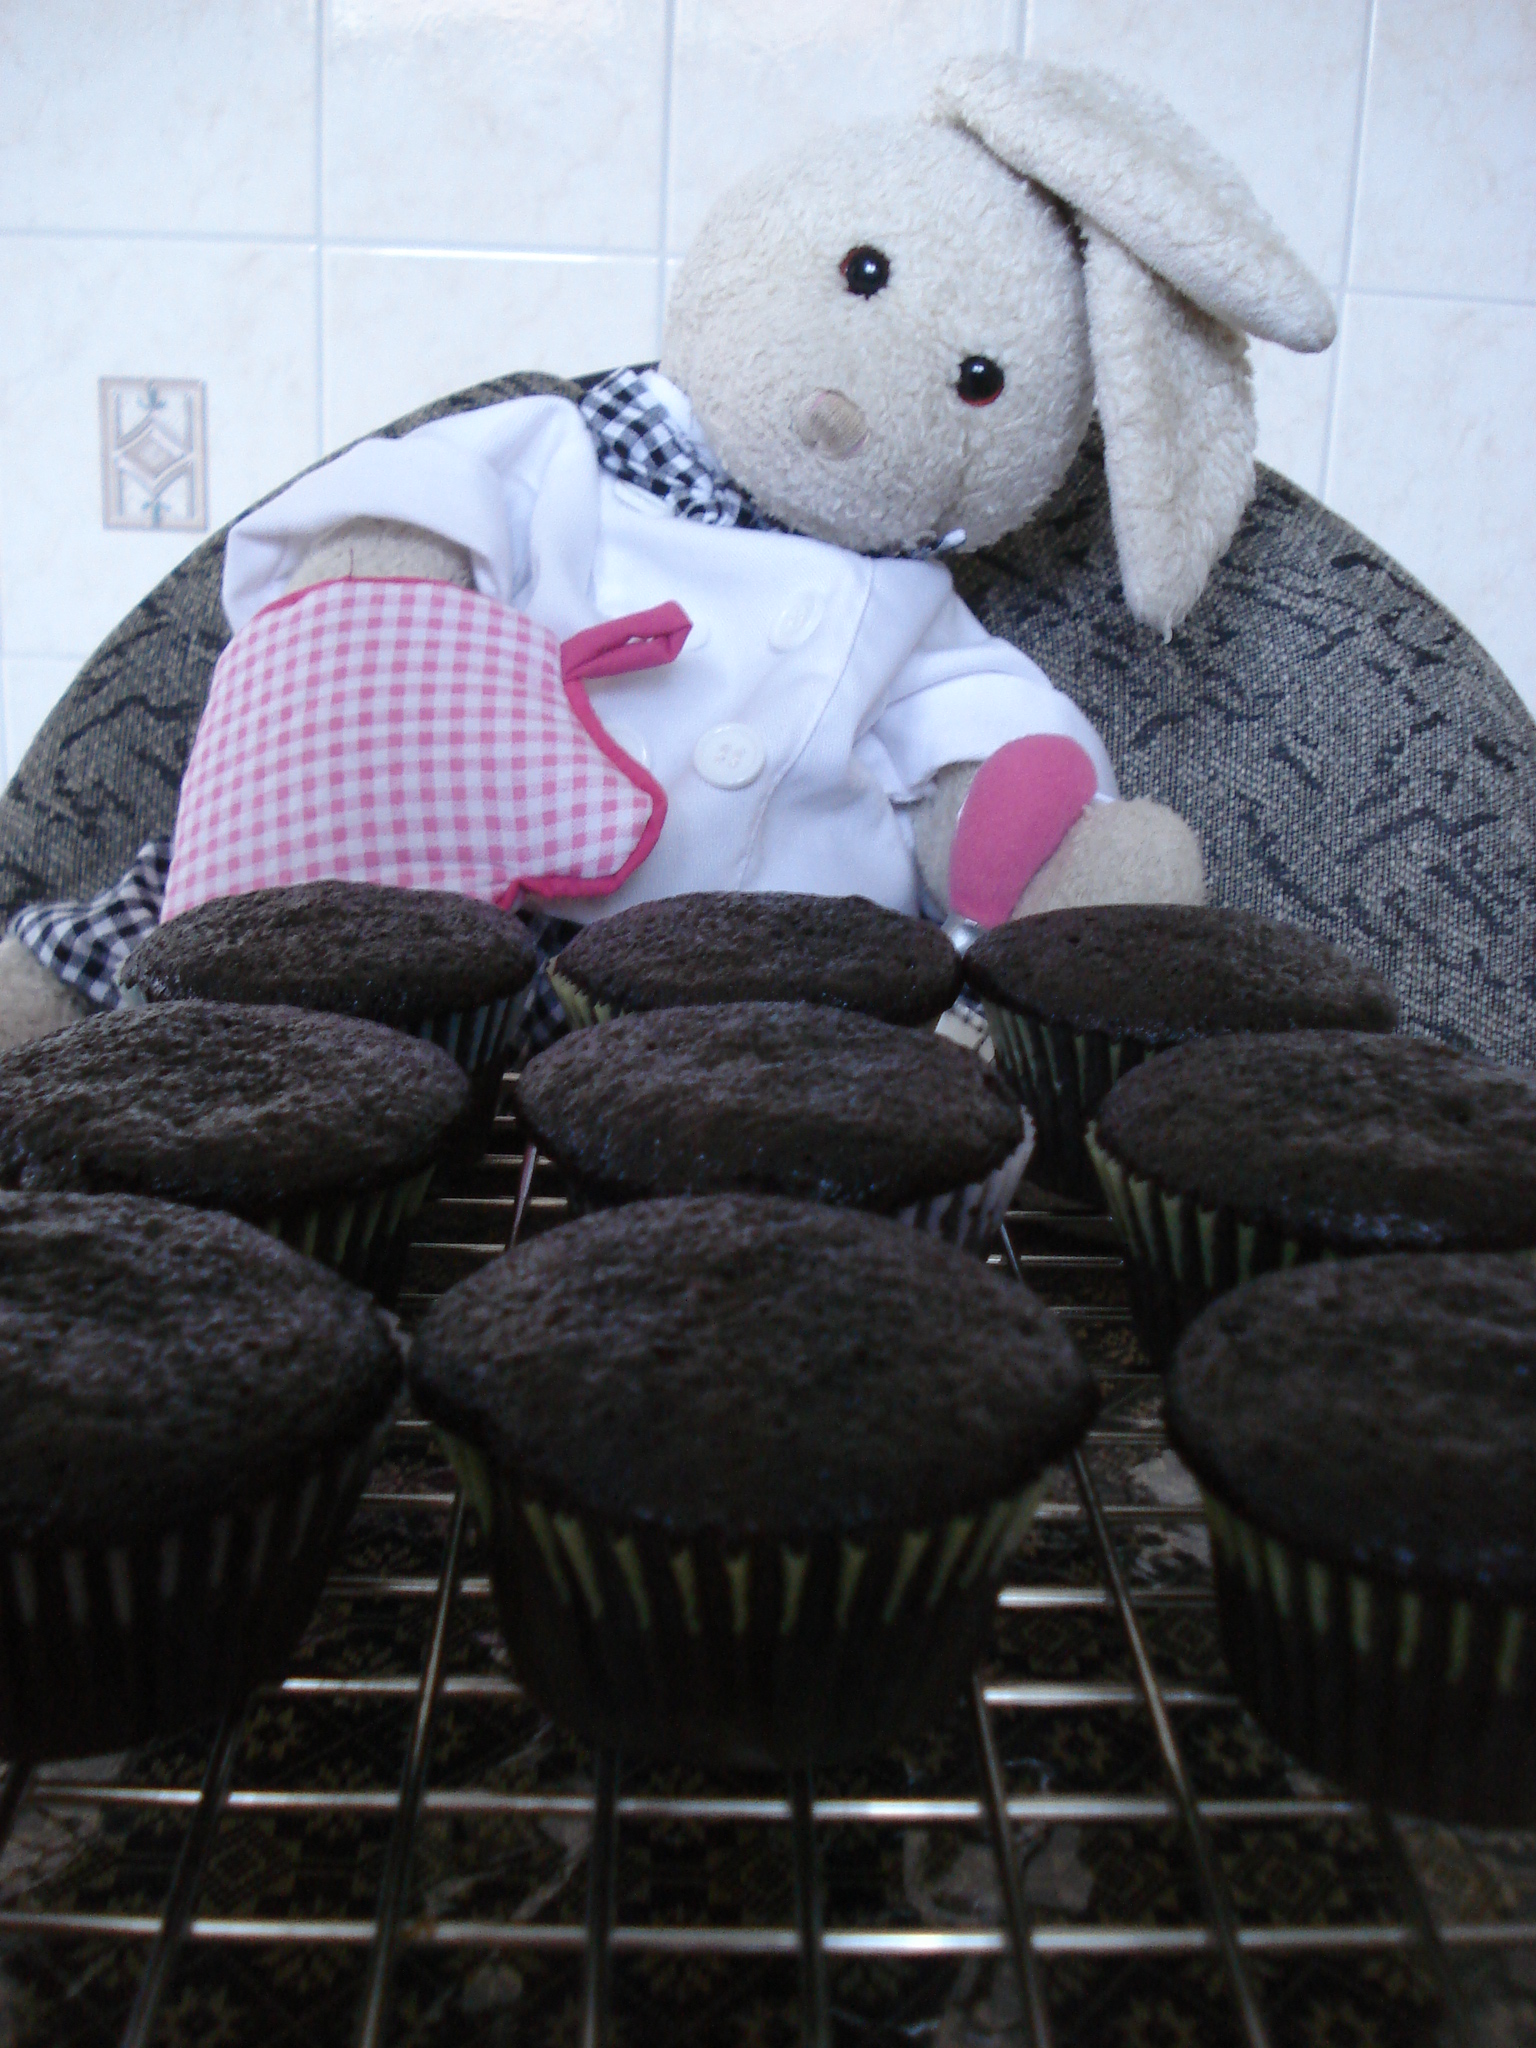 Chocolate Cupcakes Show Picture